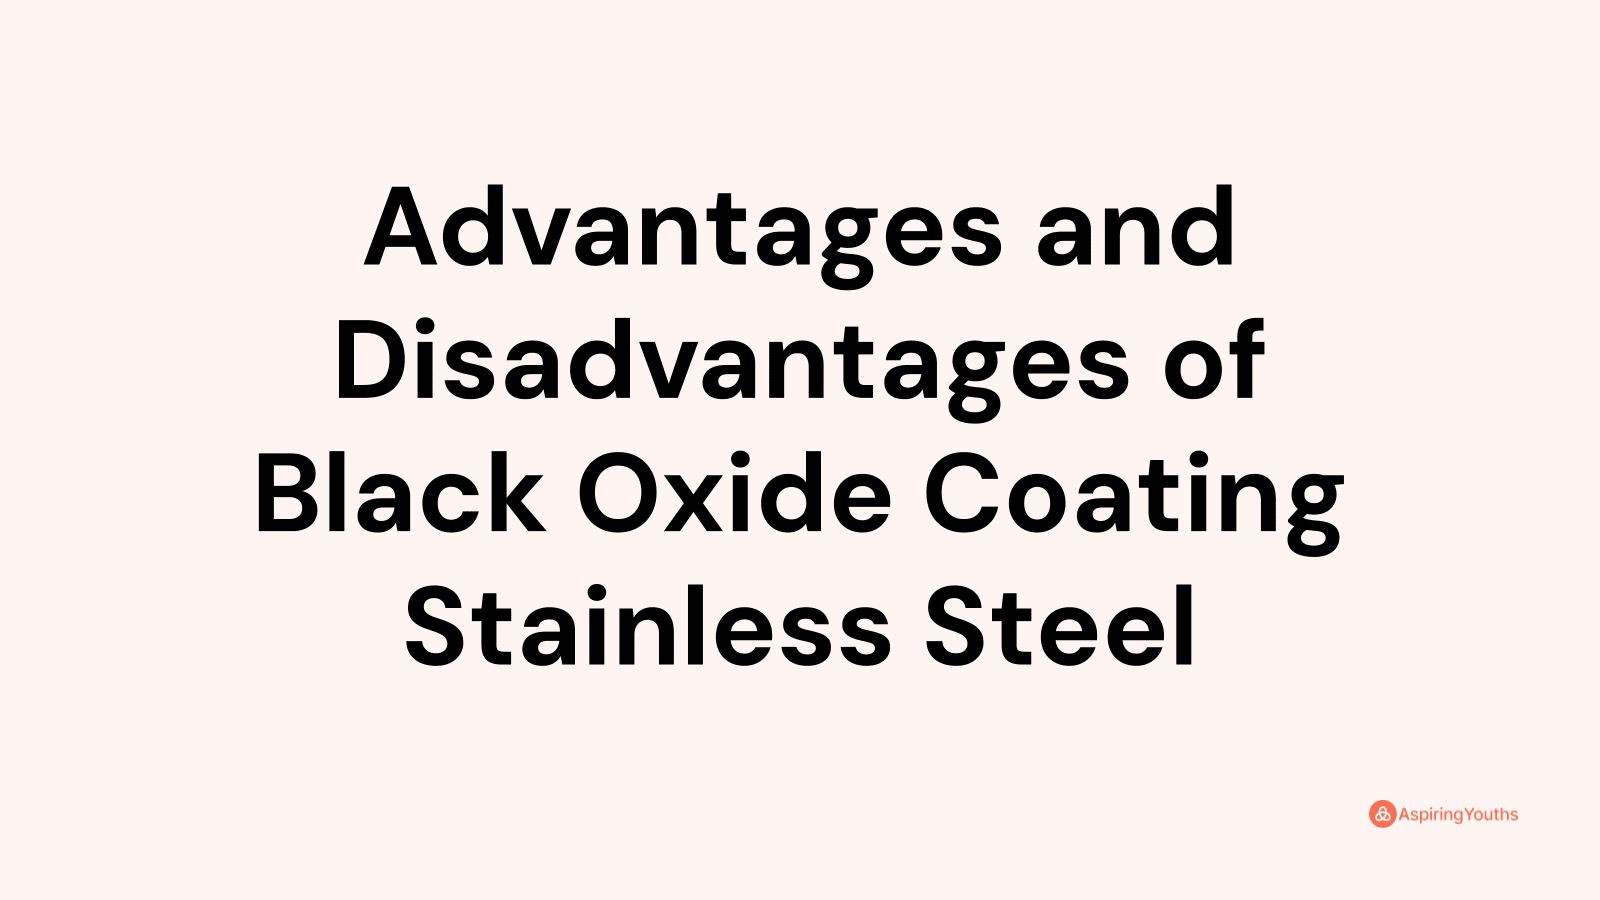 Advantages and disadvantages of Black Oxide Coating Stainless Steel